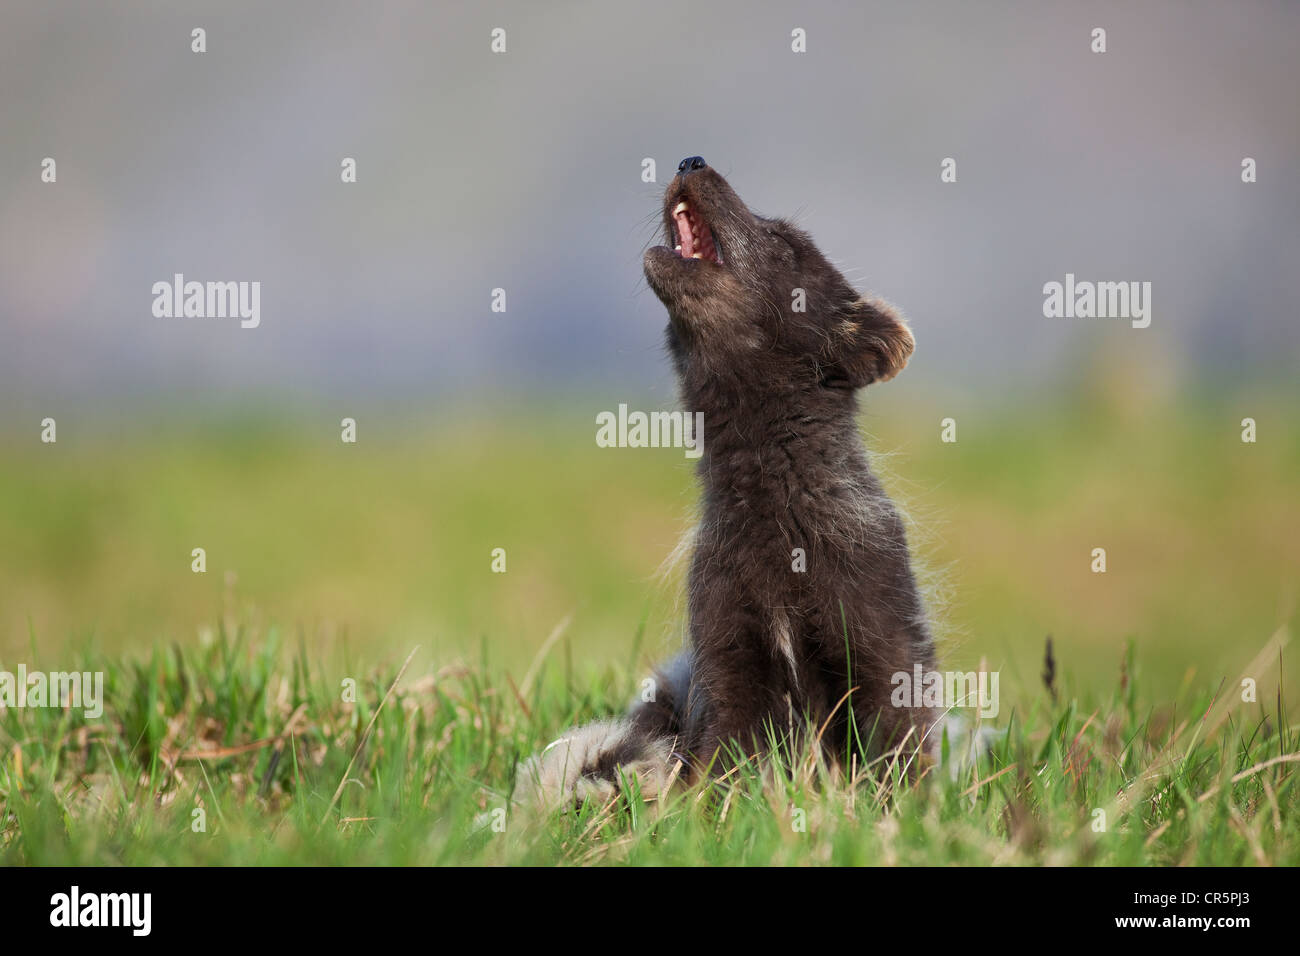 Howling Arctic Fox (Alopex lagopus), West Fjords, Iceland, Europe Stock Photo